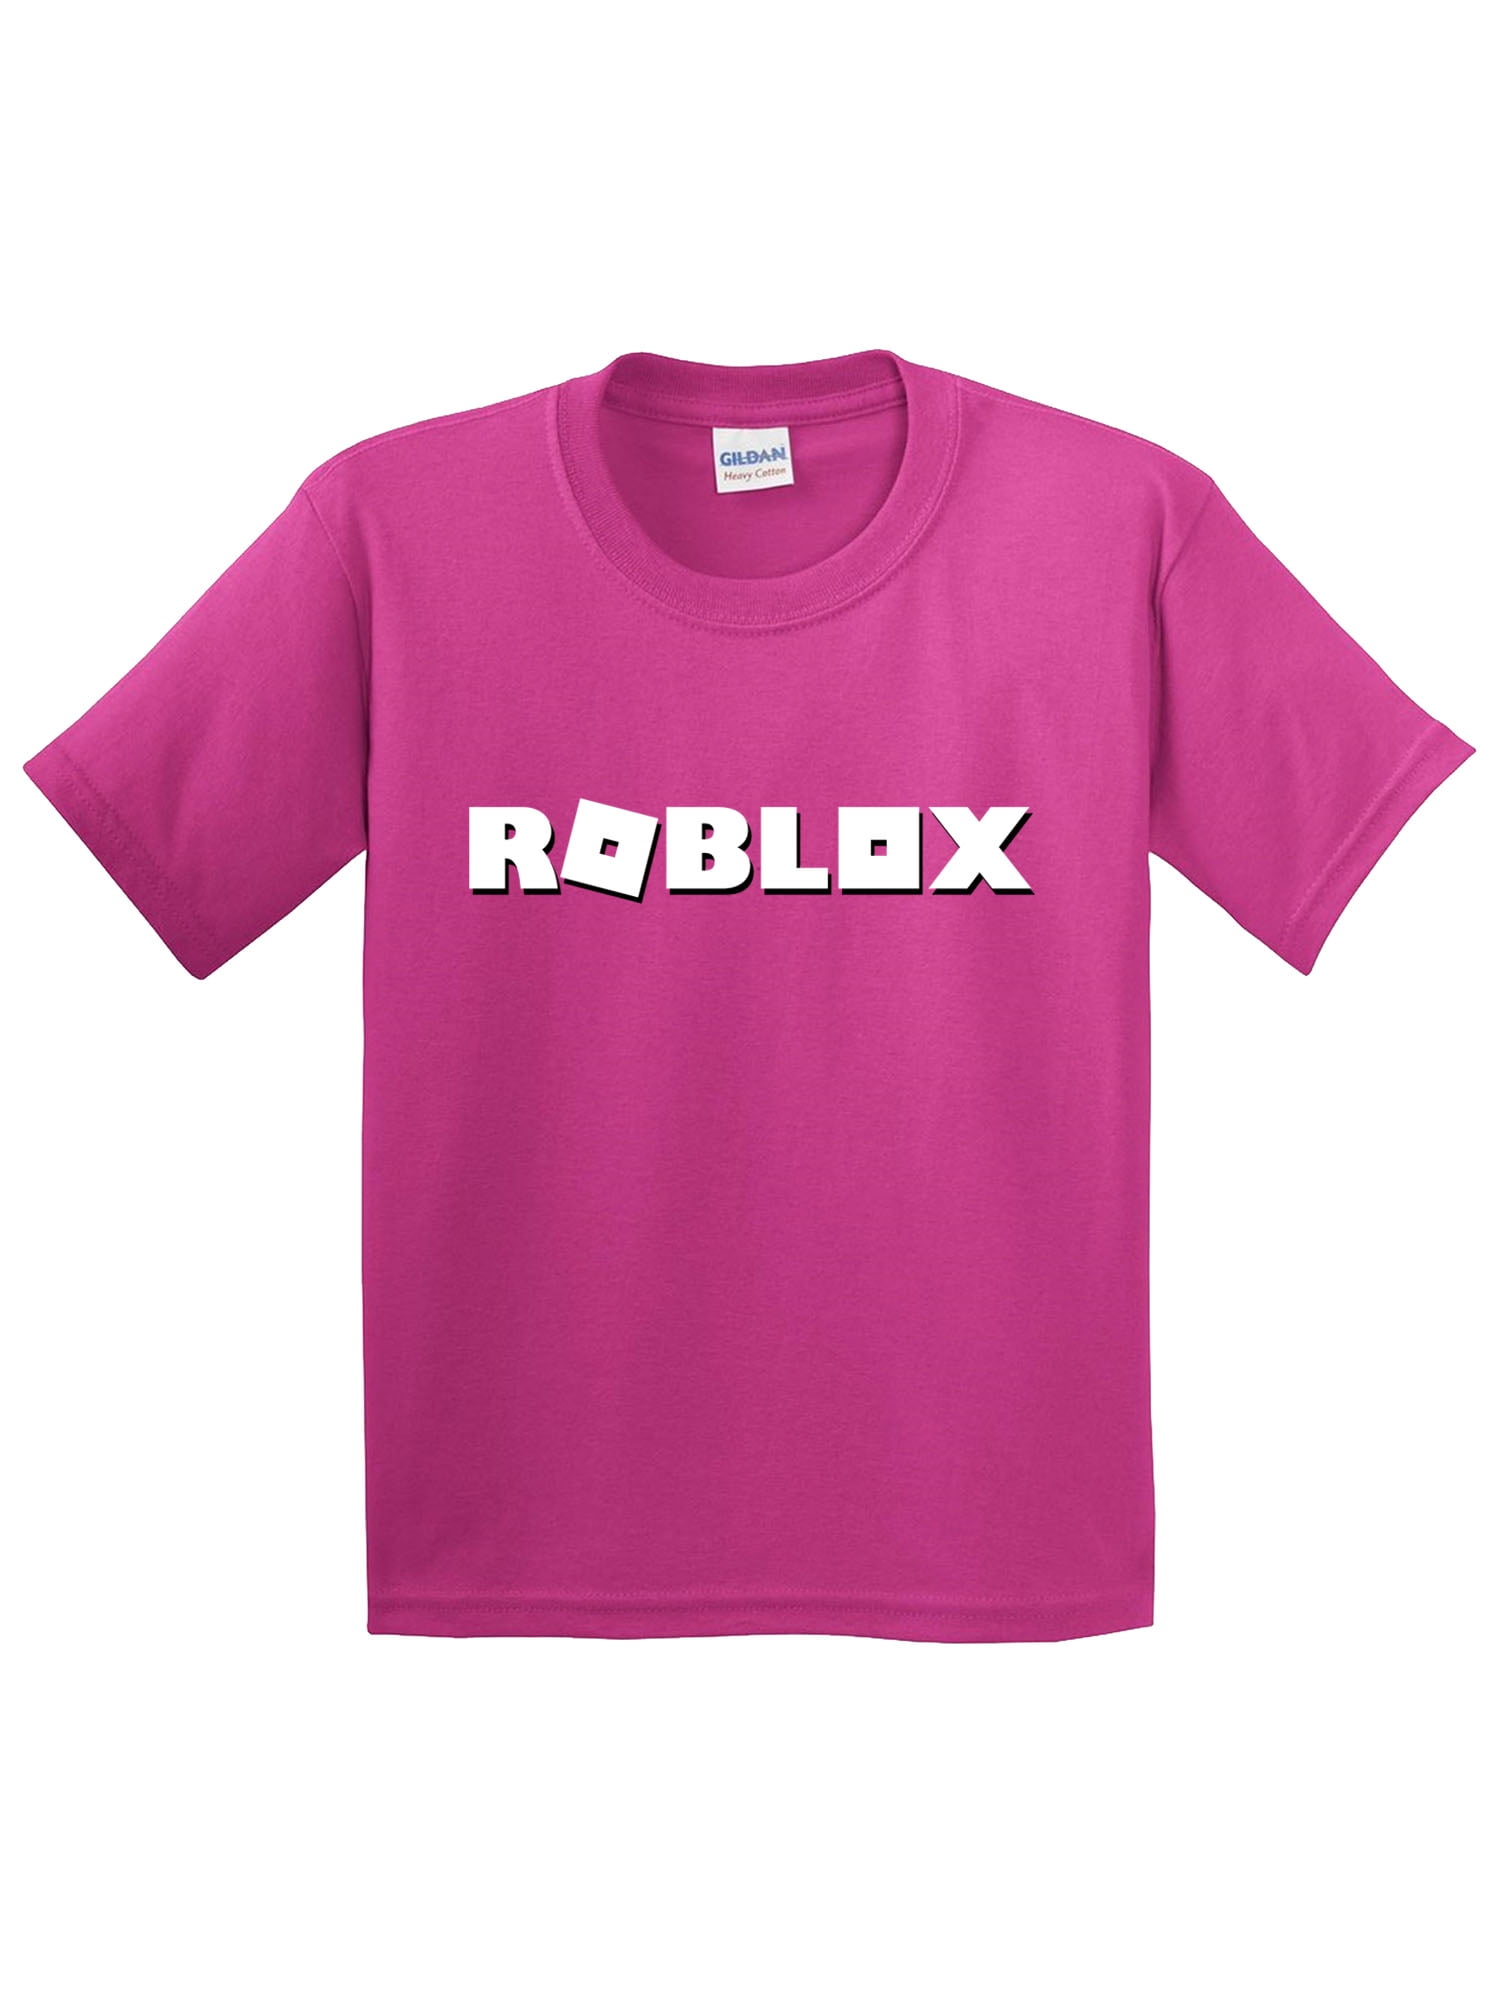 New Way New Way 923 Youth T Shirt Roblox Logo Game Accent Xl - new way new way 923 youth t shirt roblox logo game accent xl heliconia walmart com